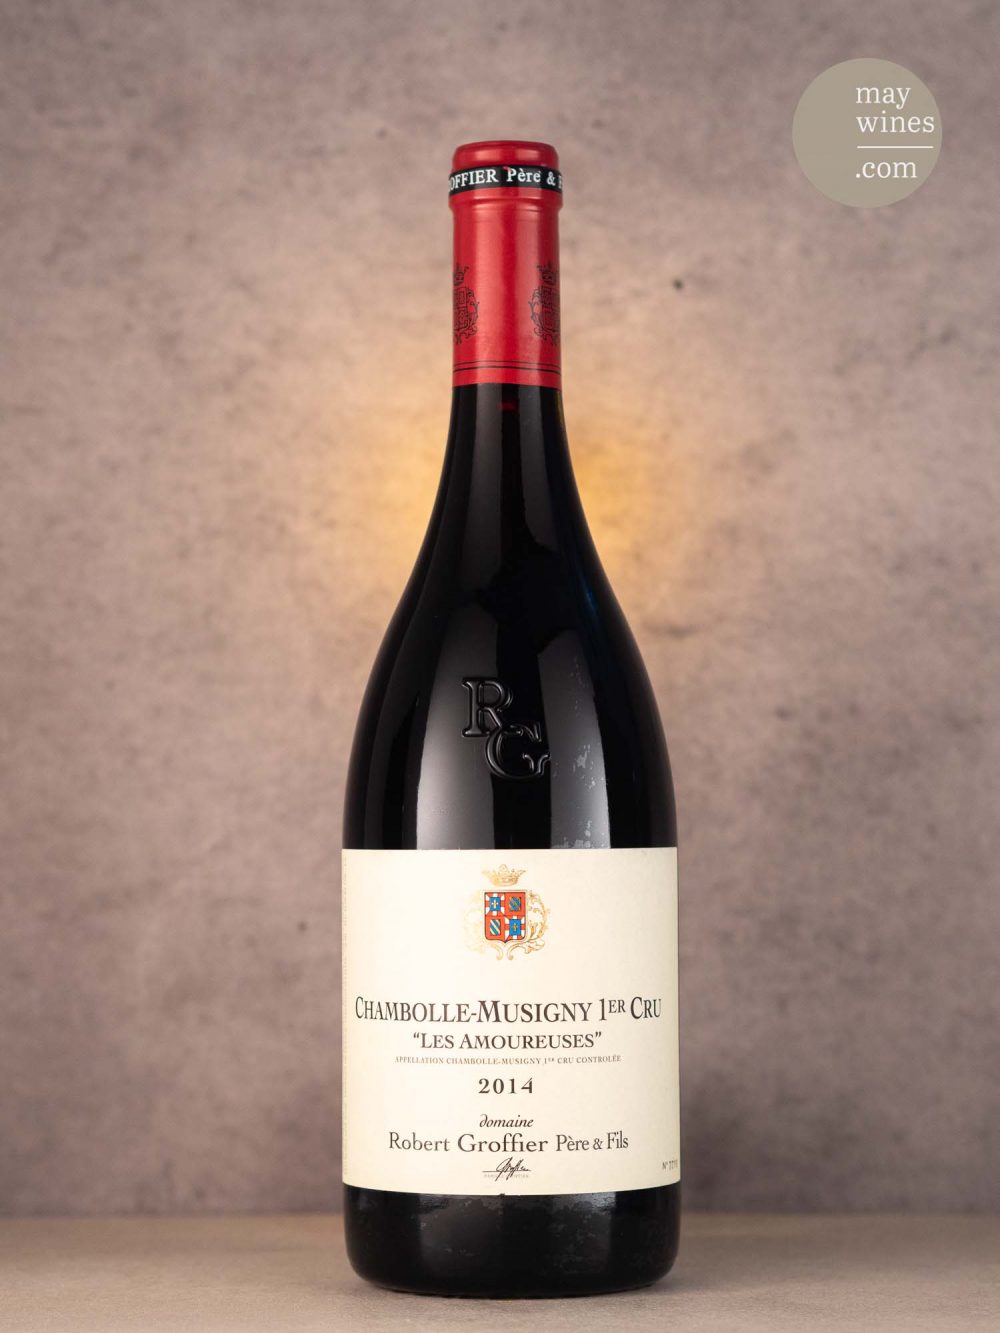 May Wines – Rotwein – 2014 Chambolle-Musigny Les Amoureuses Premier Cru - Domaine Robert Groffier Père & Fils